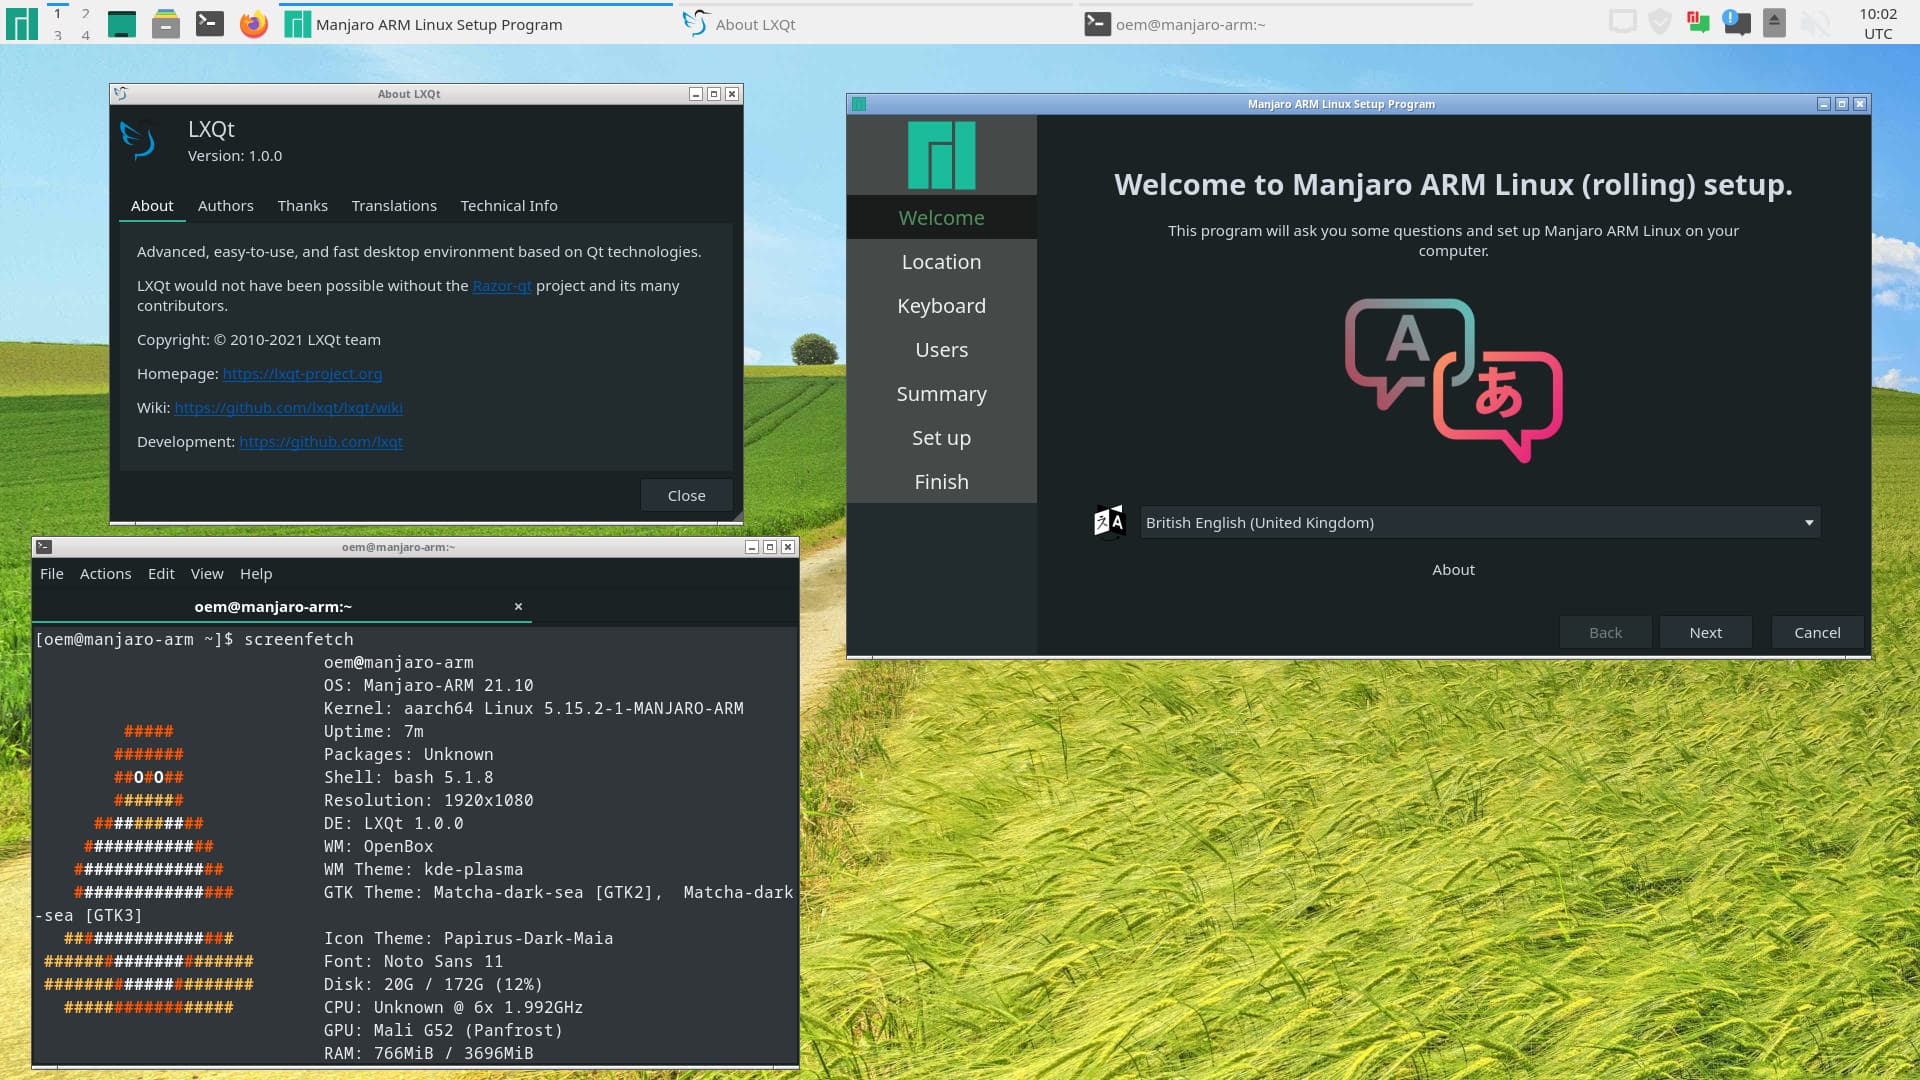 ARM Stable Update] 2021-12-13 - Firefox, KDE Gear, Thunderbird,  LibreOffice, ICU and Kernels - Stable Updates - Manjaro Linux Forum